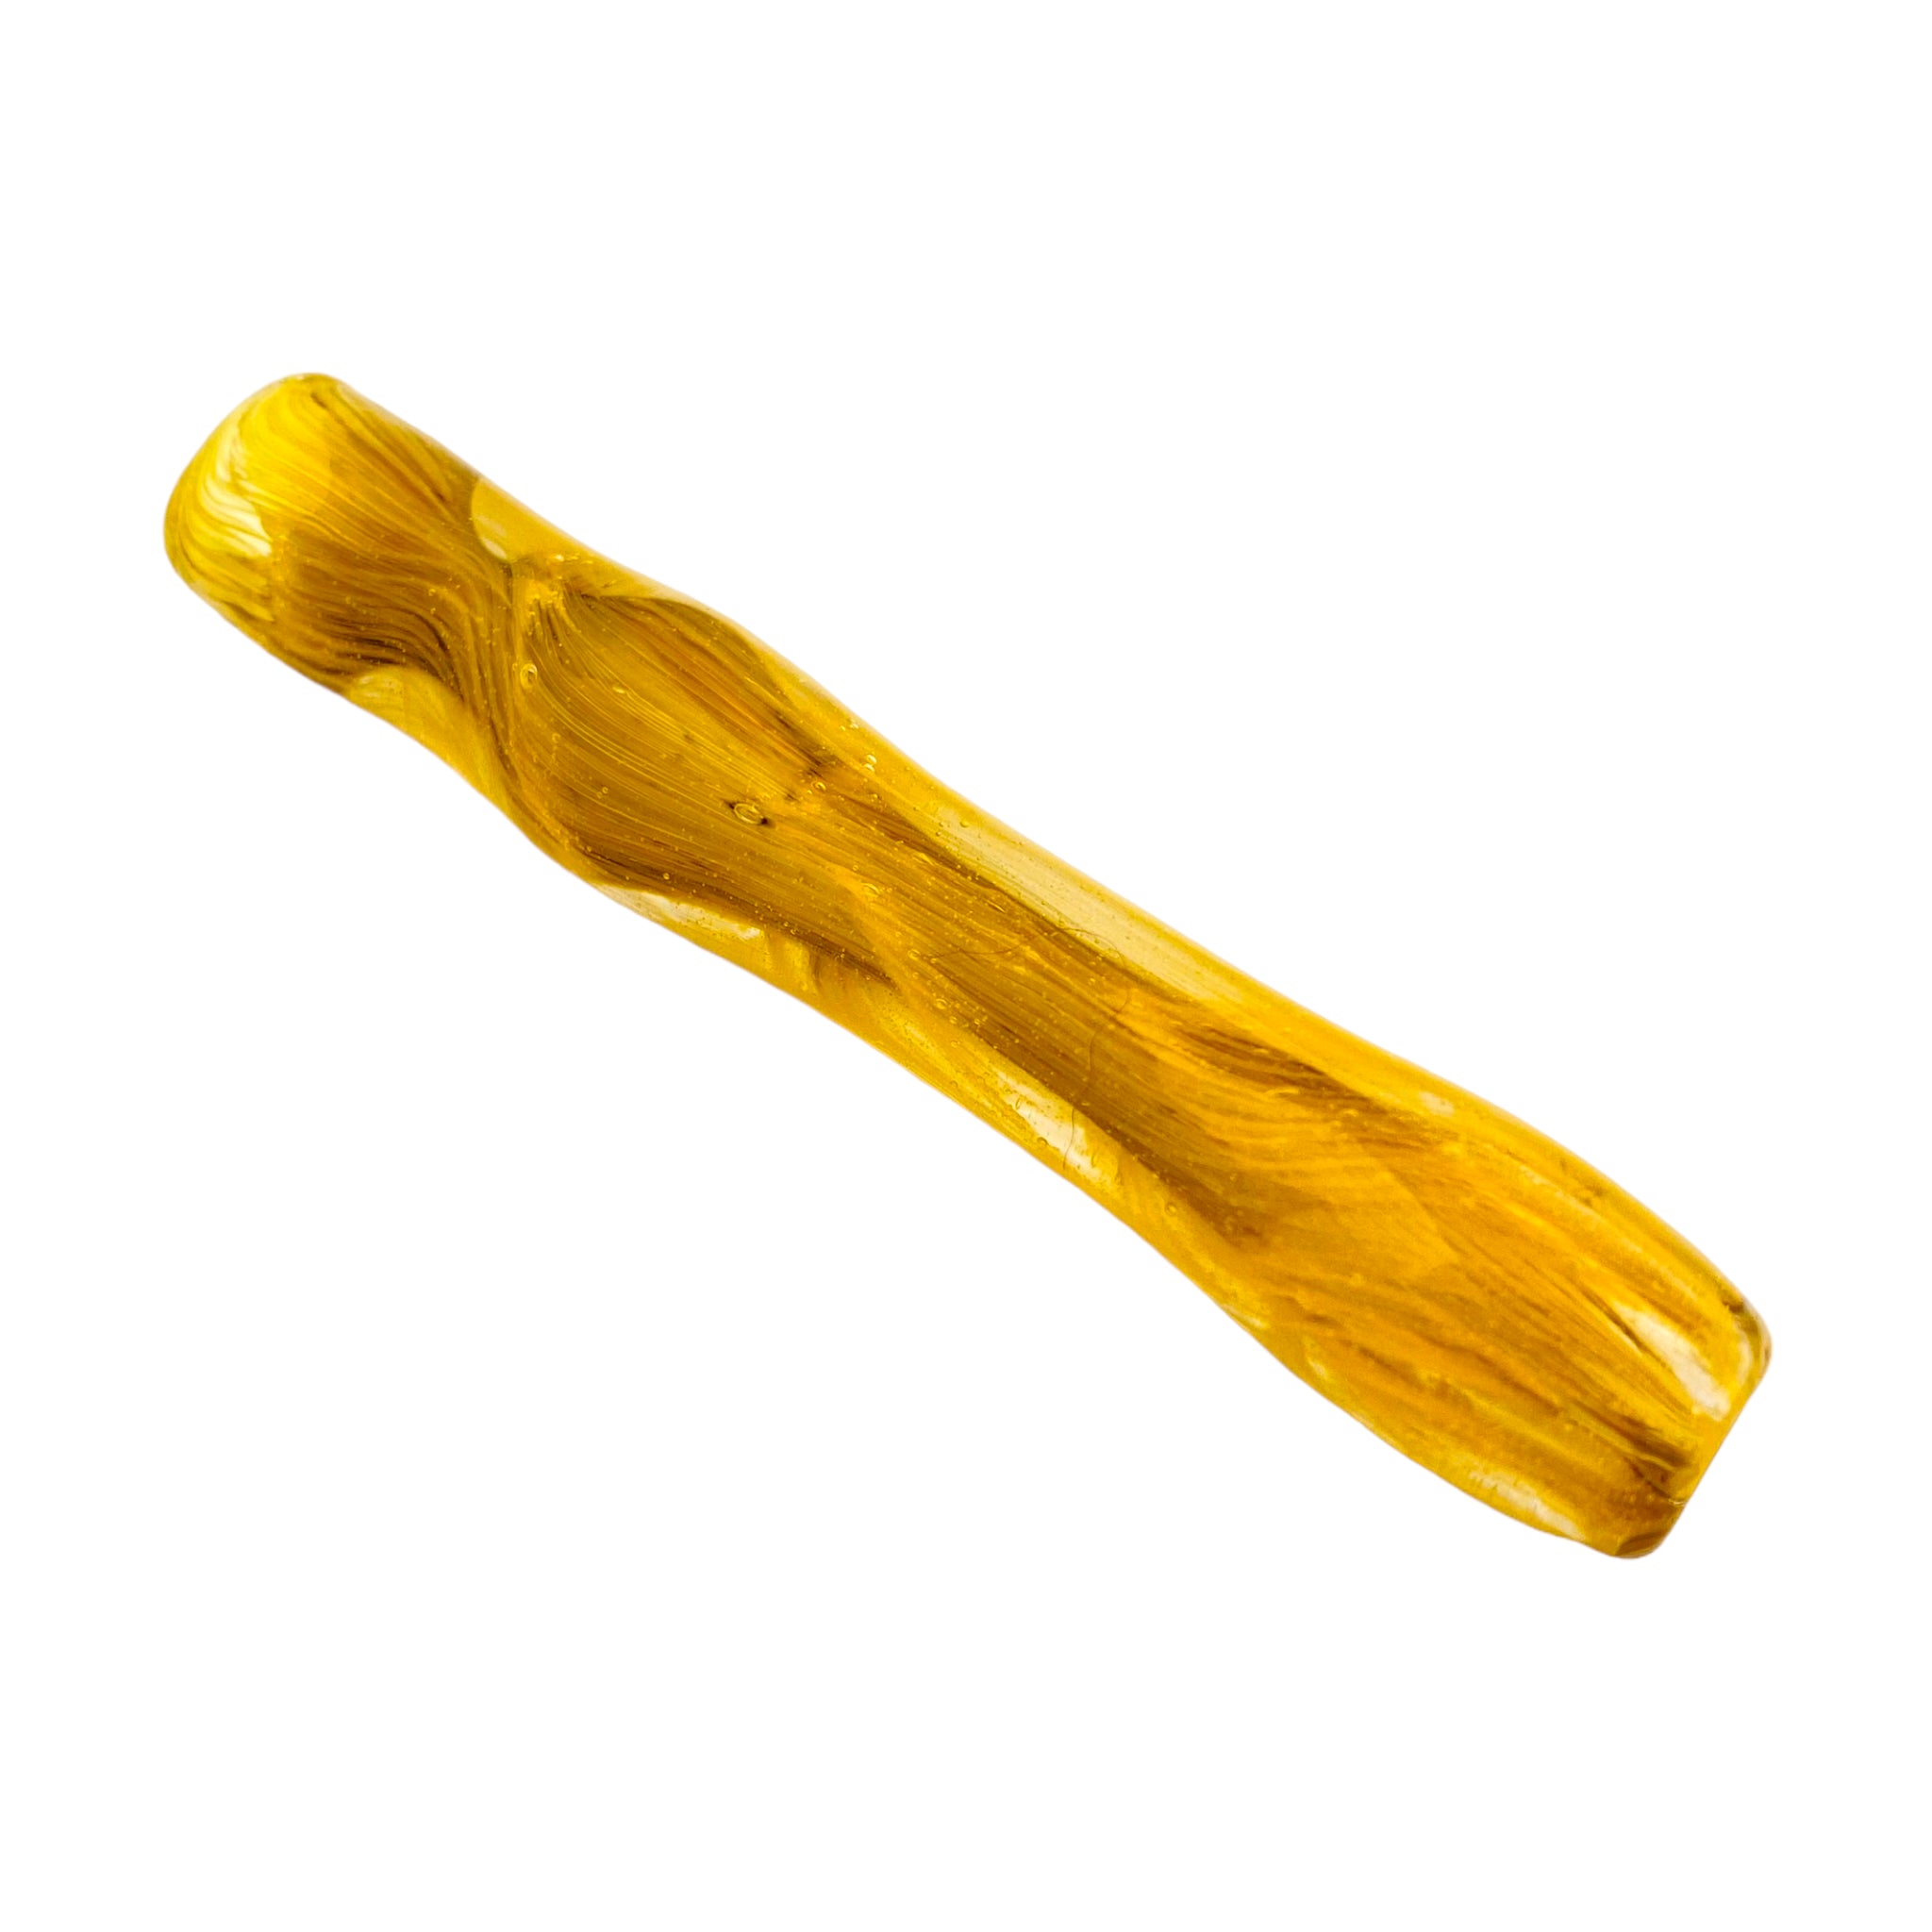 Glass Chillum Pipe - Yellow & Black With Sparkles Glass One Hitter